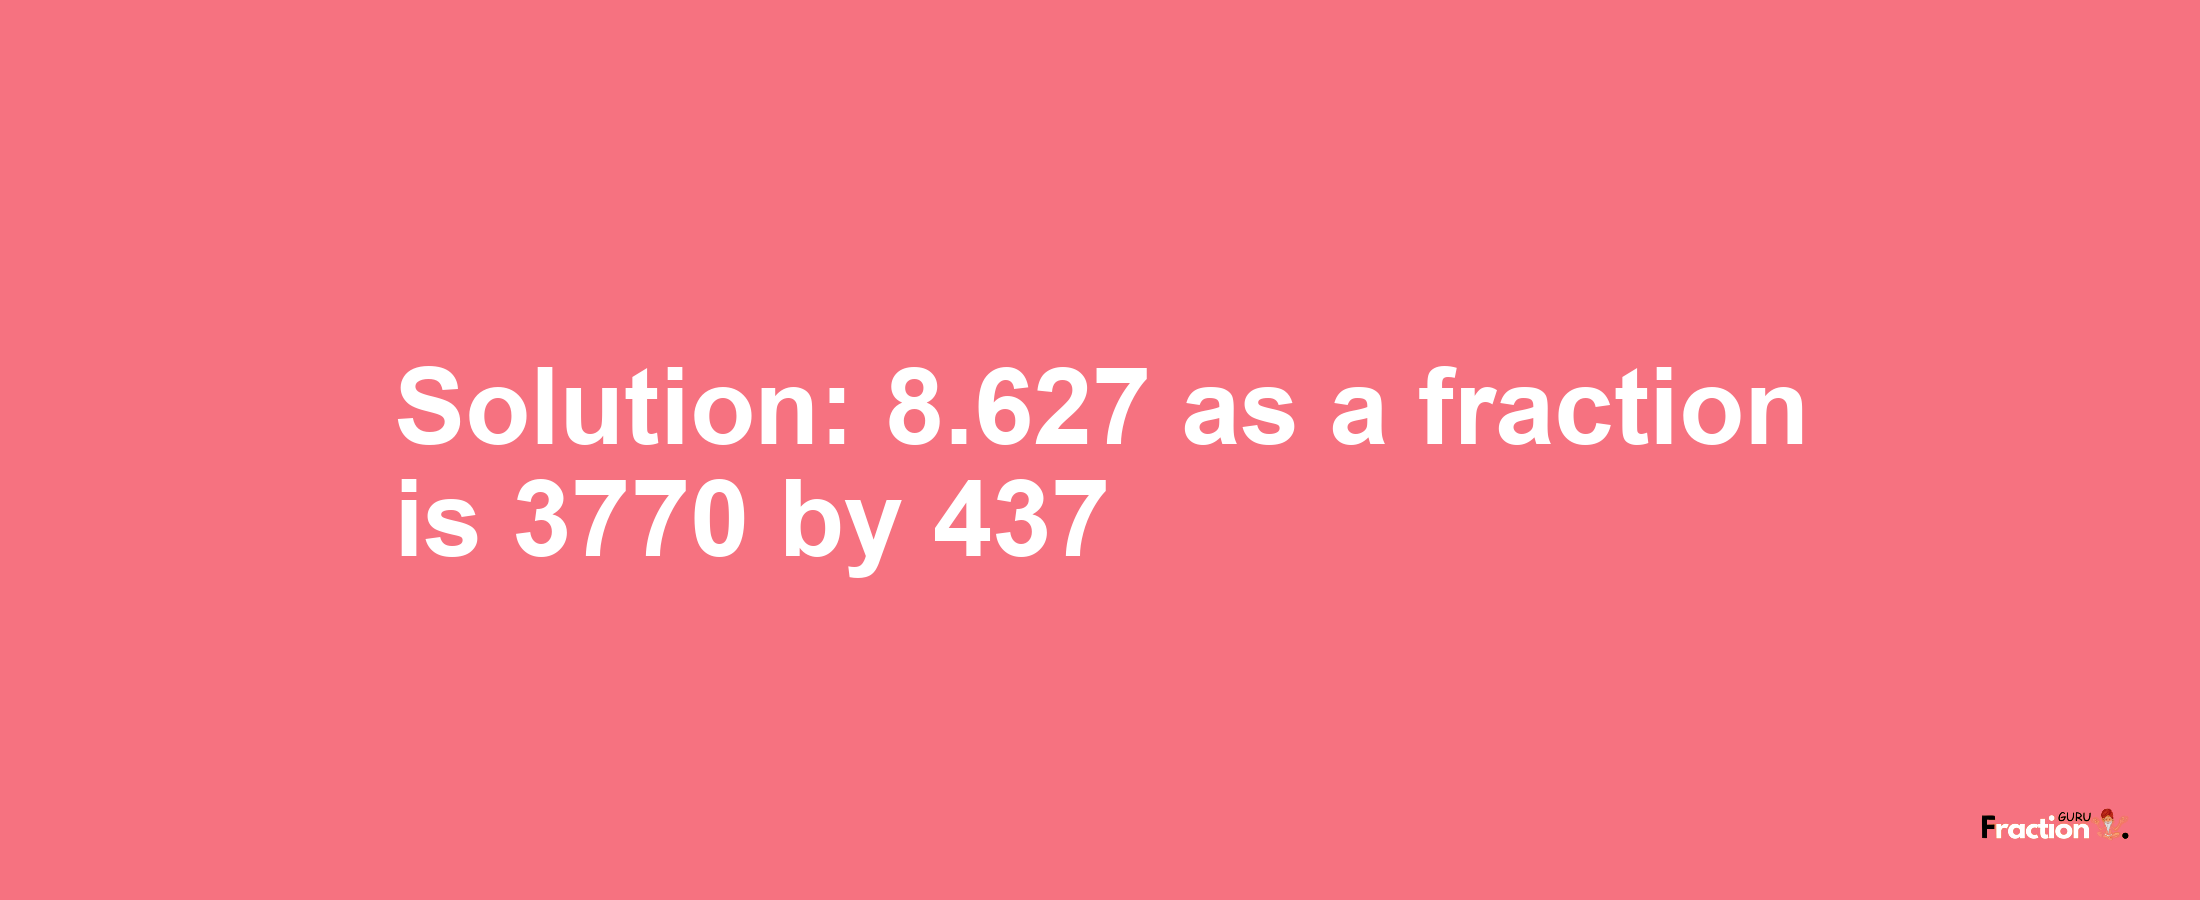 Solution:8.627 as a fraction is 3770/437